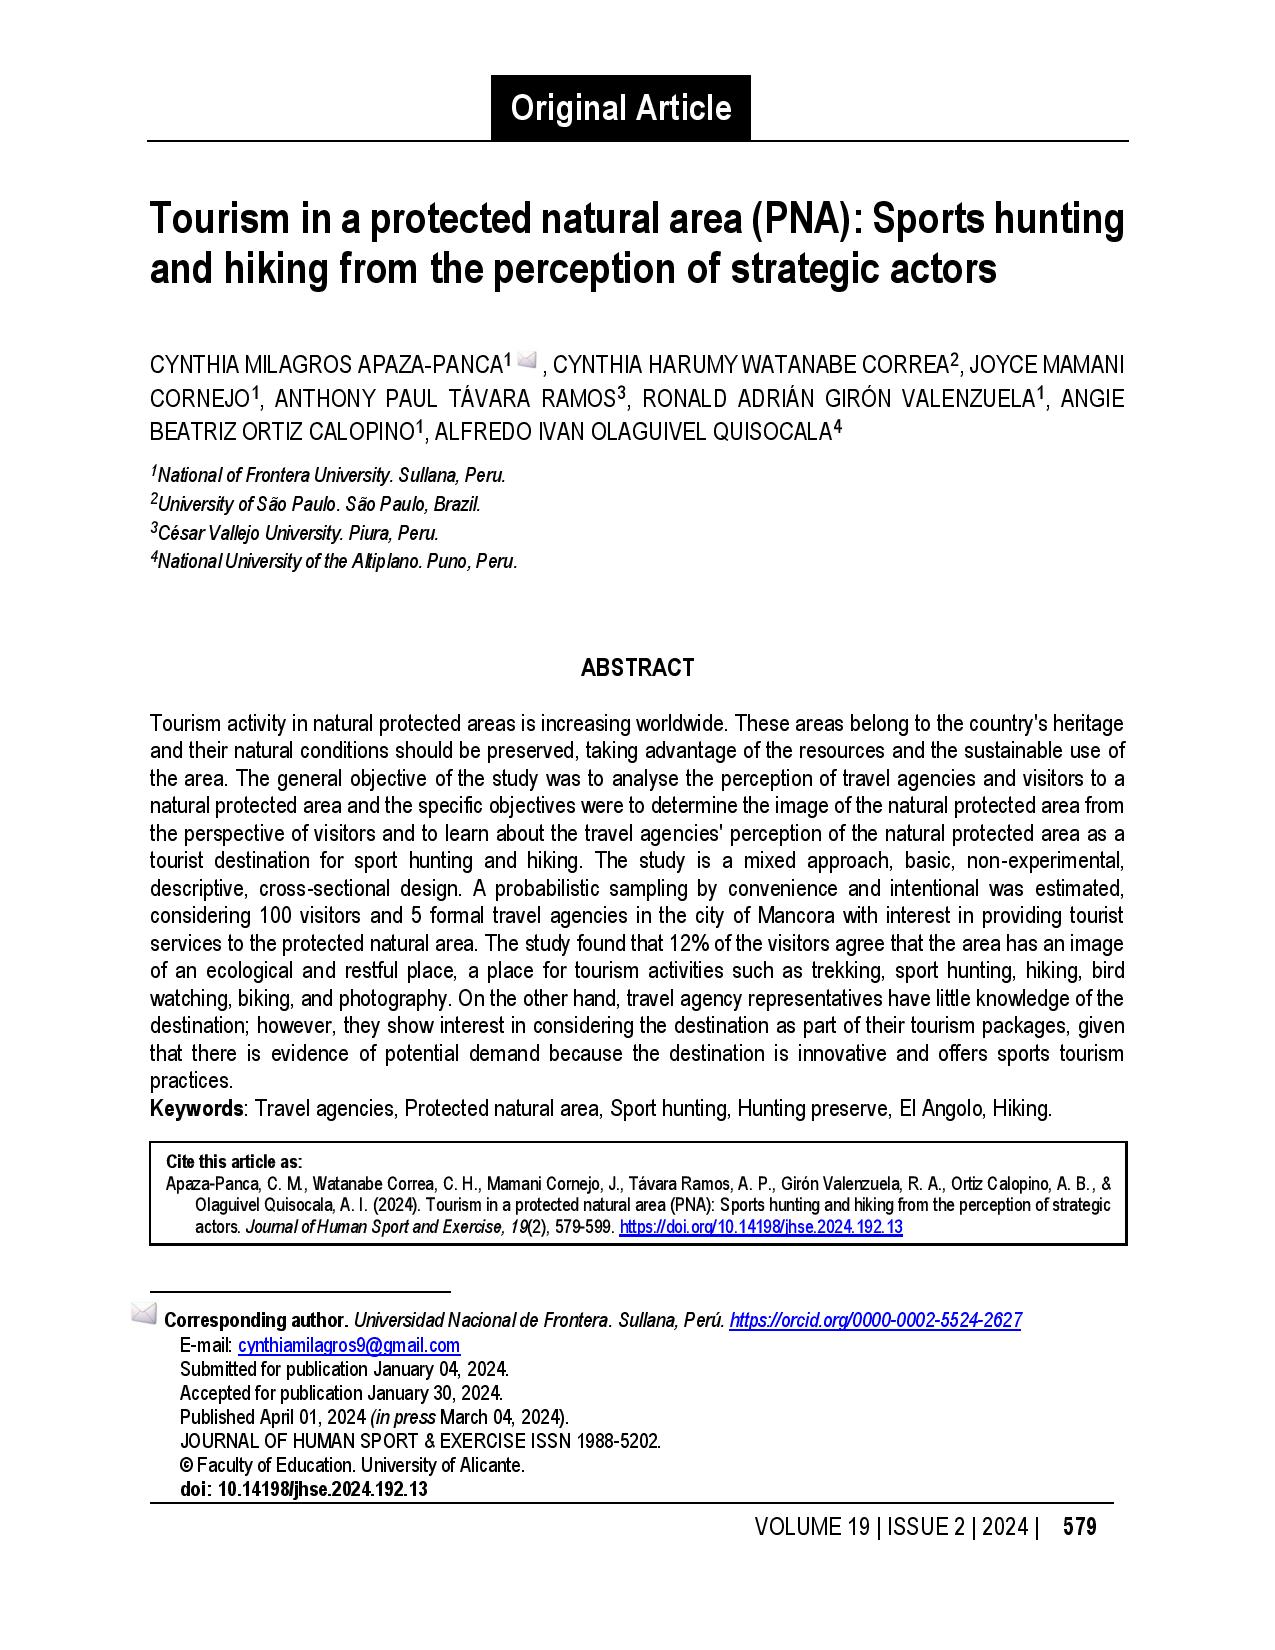 Tourism in a protected natural area (PNA): Sports hunting and hiking from the perception of strategic actors